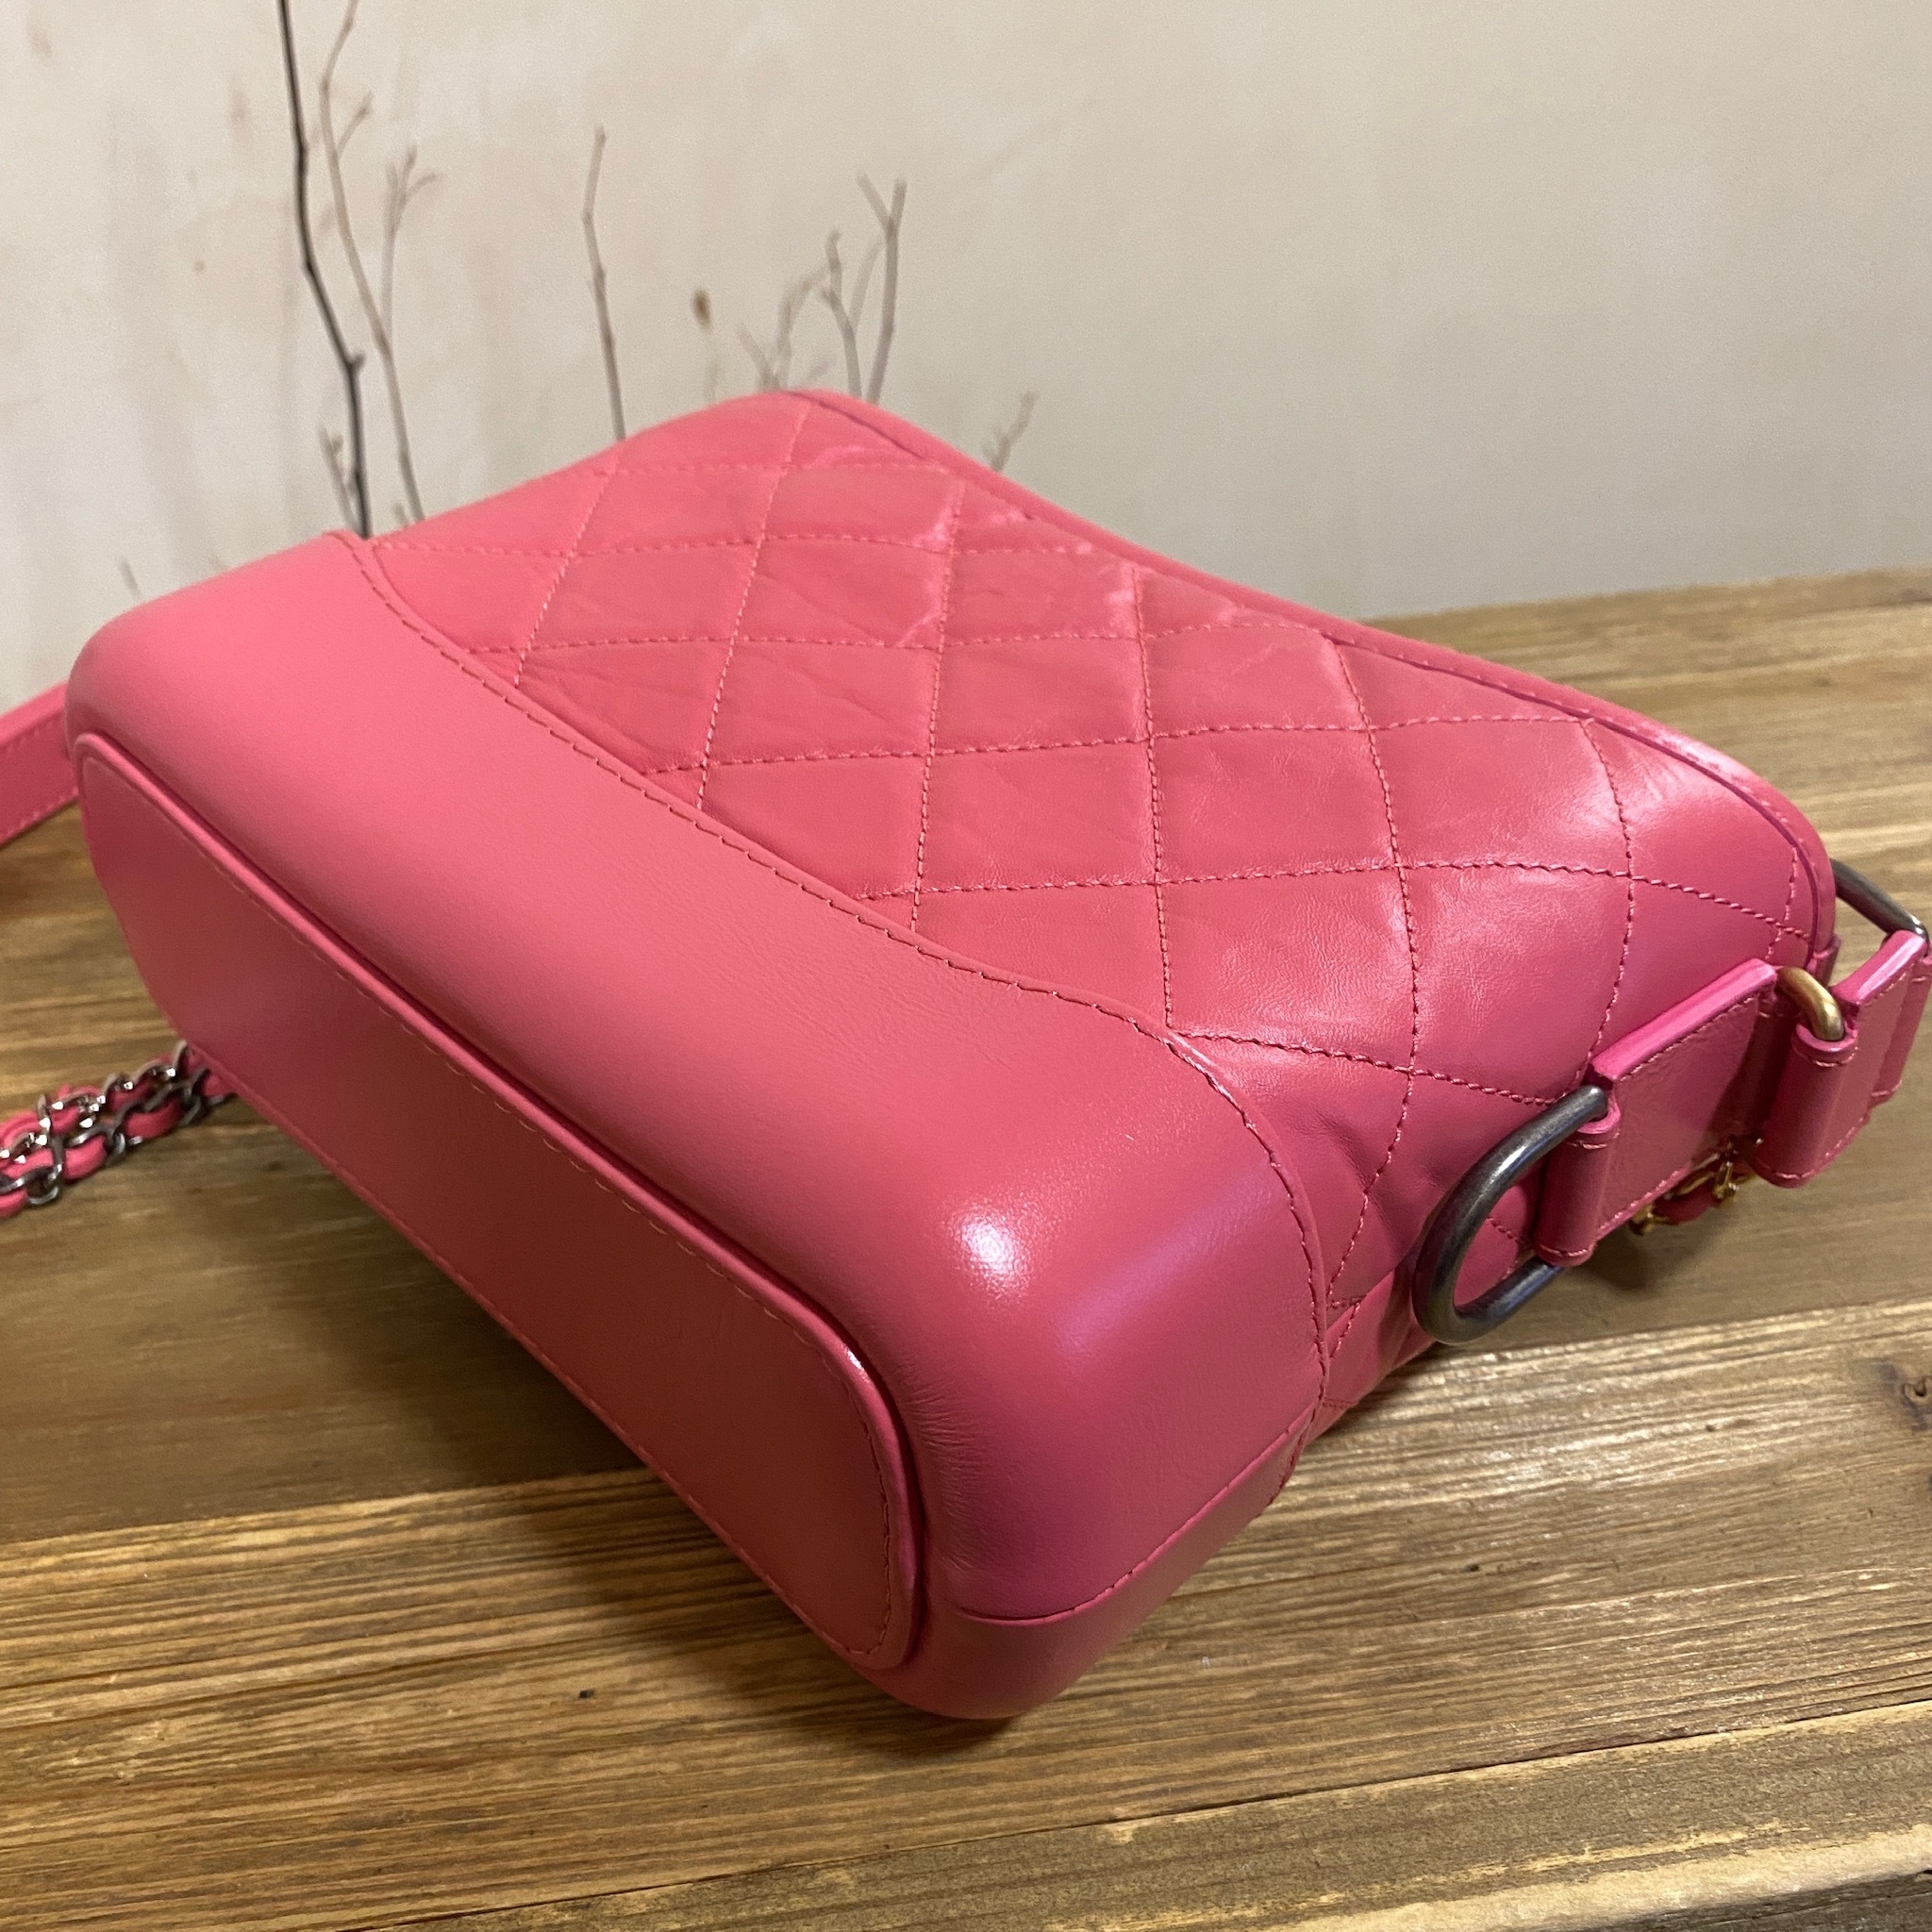 [Unused] Chanel gabrielle hobo small pink